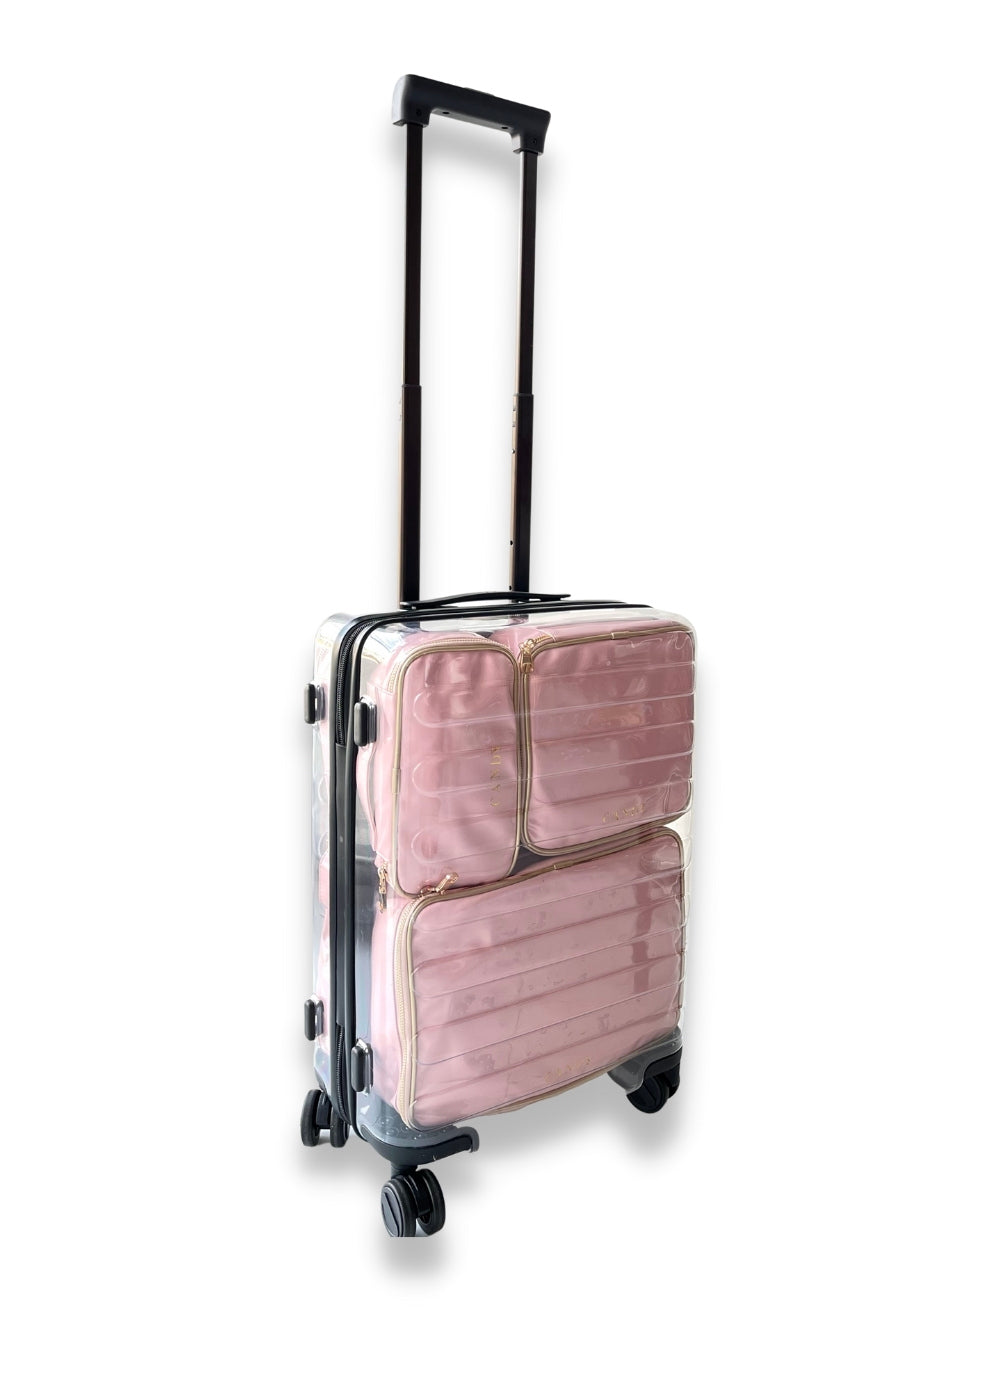 Transparent carry-on luggage [PRE-ORDER]